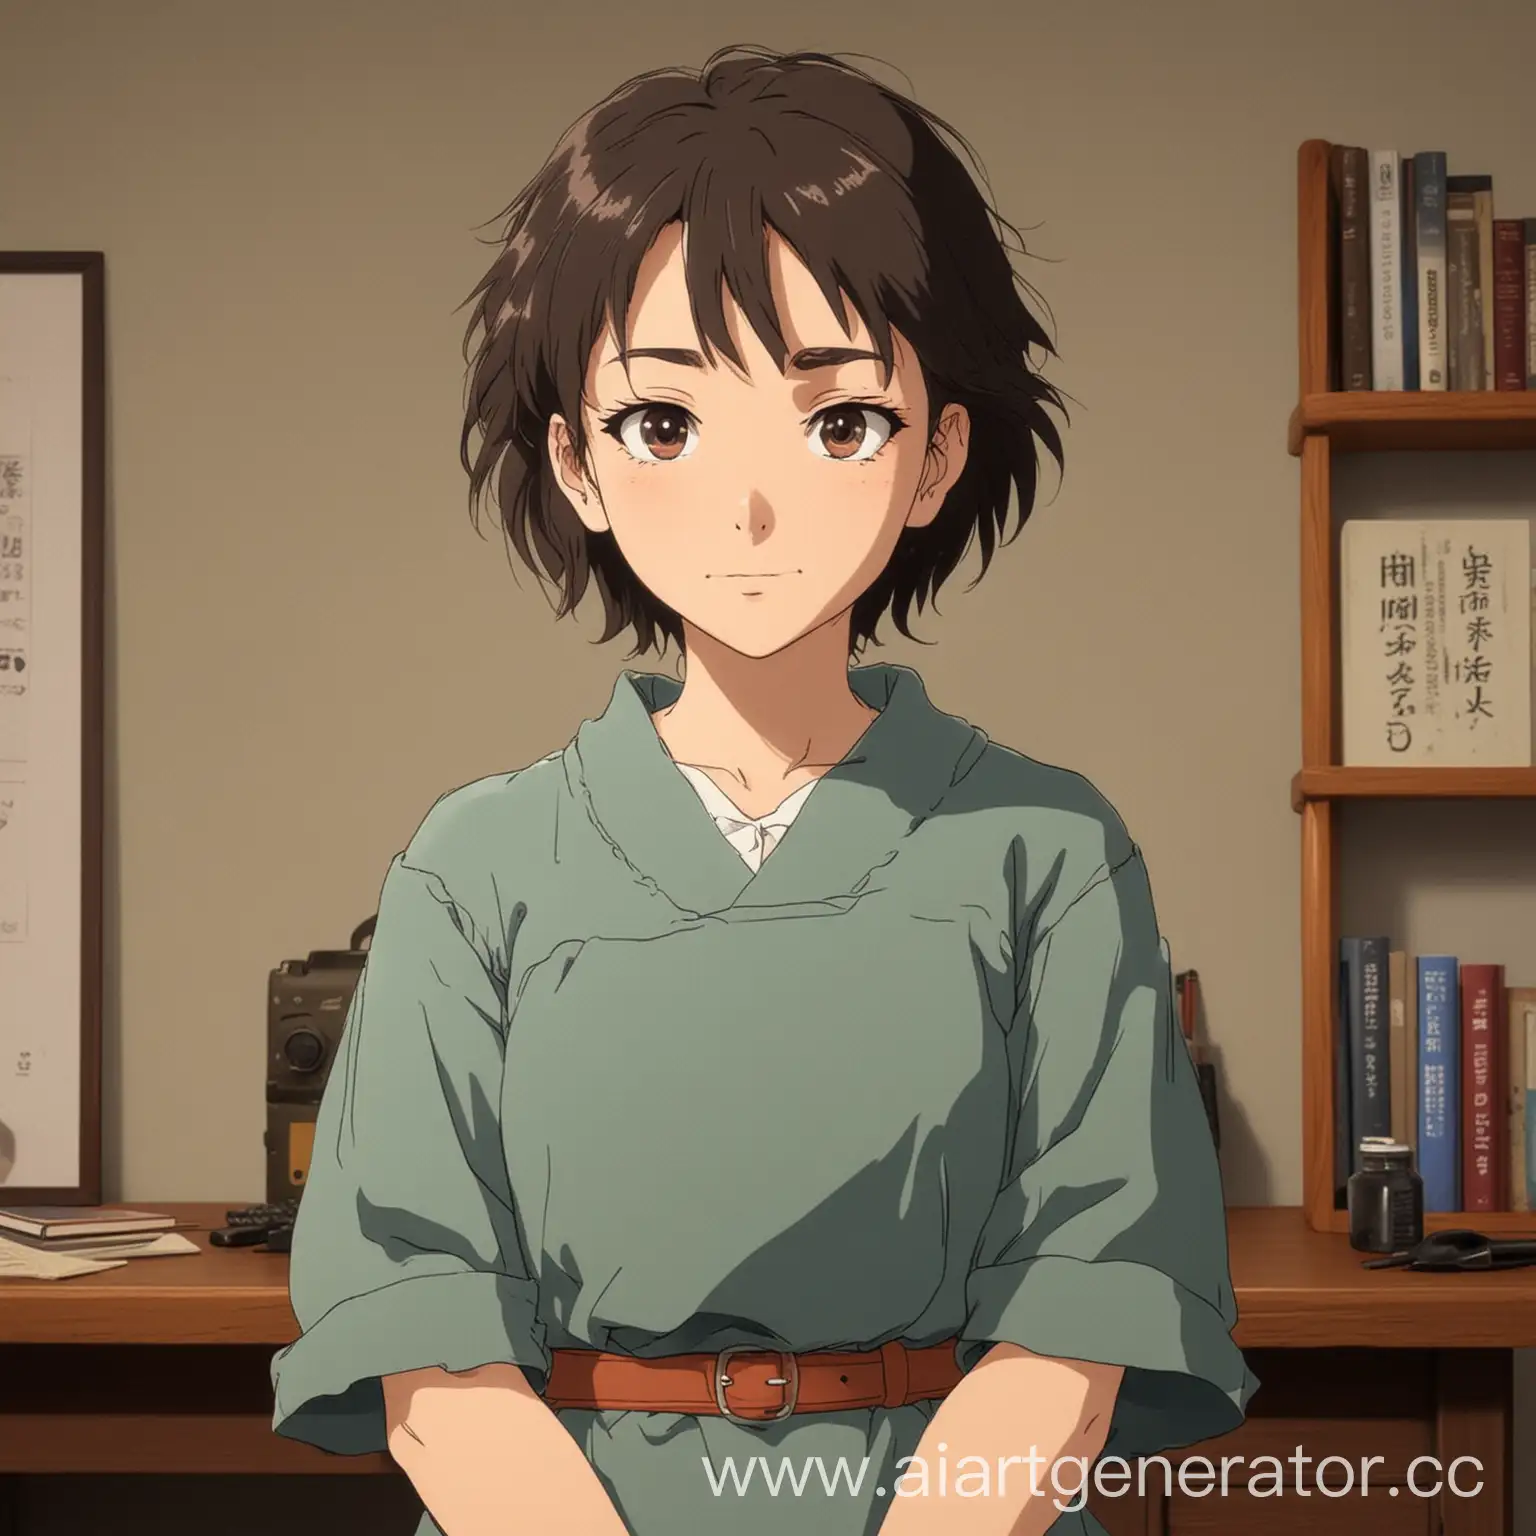 Anime-Strong-Independent-Woman-in-Studio-Ghibli-Style